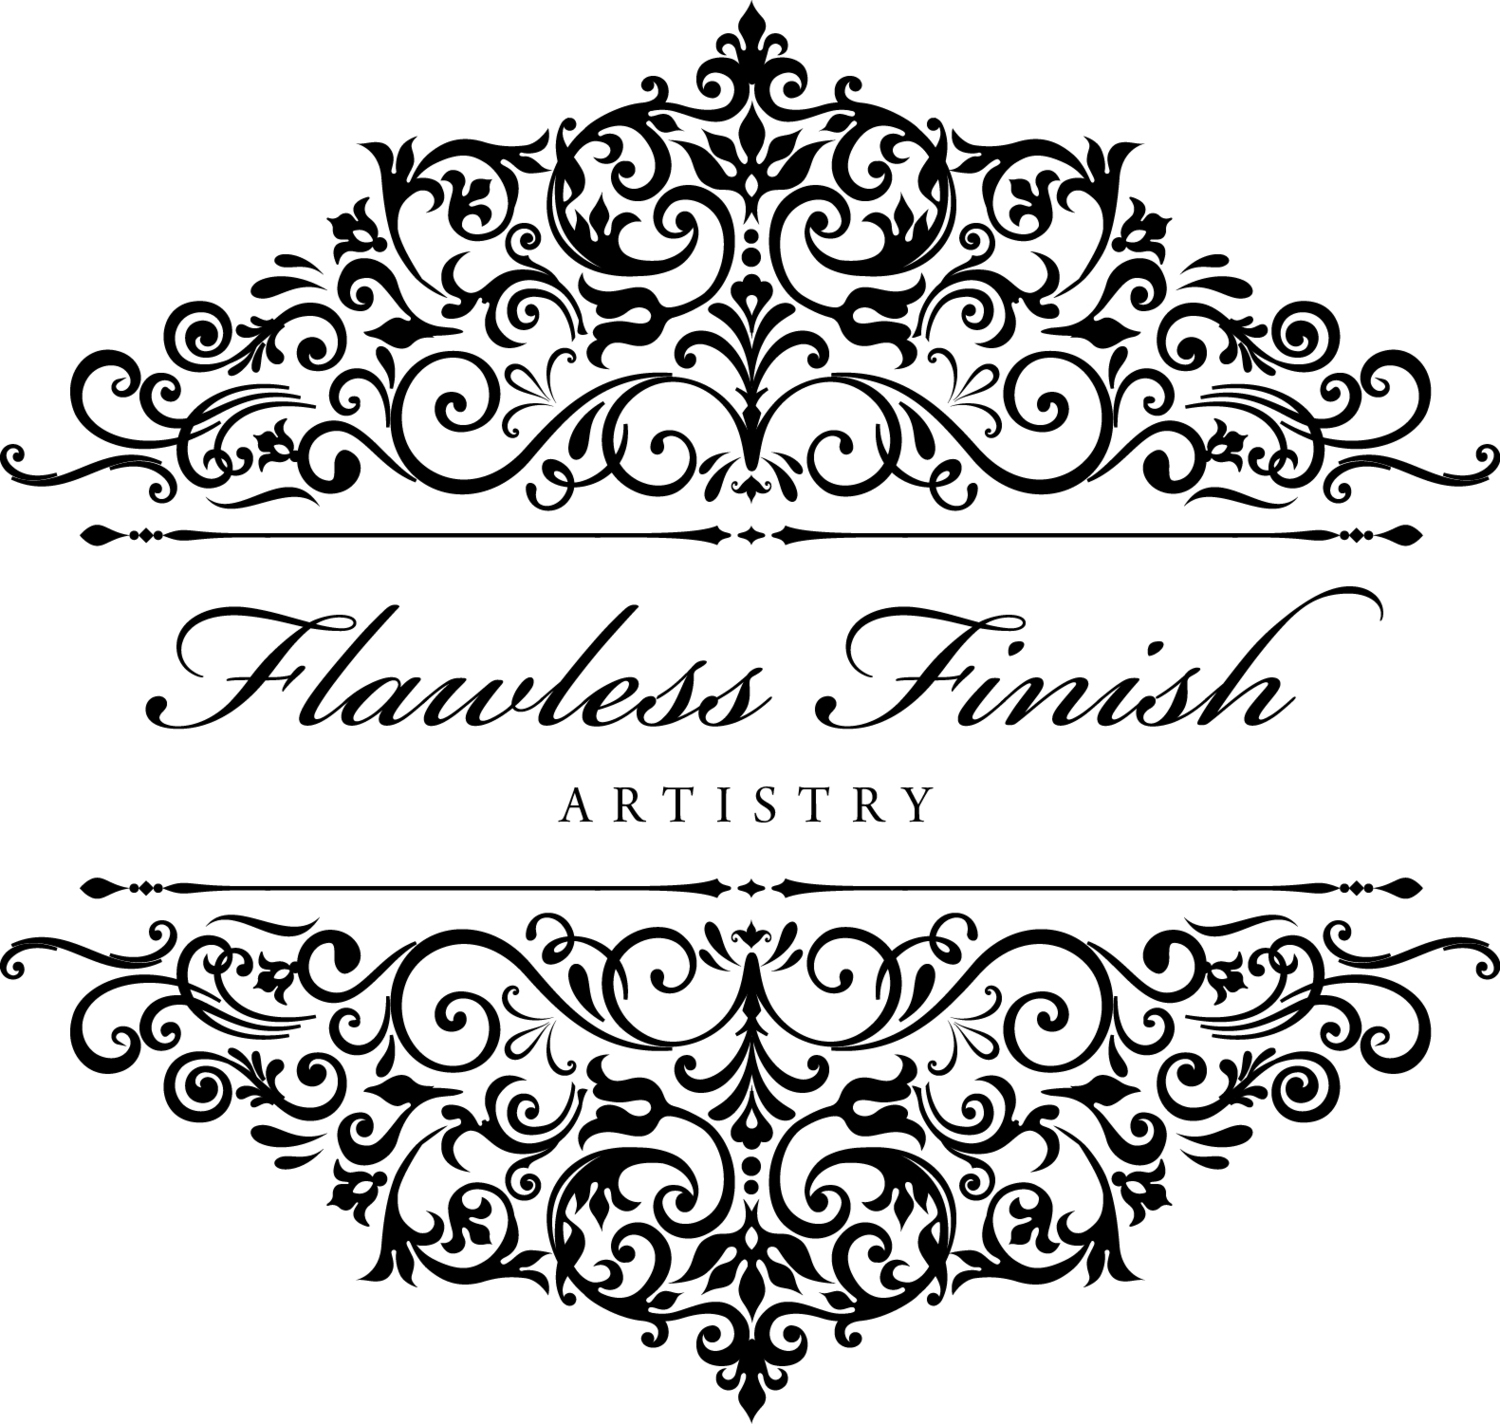 Flawless Finish ArtistryHome